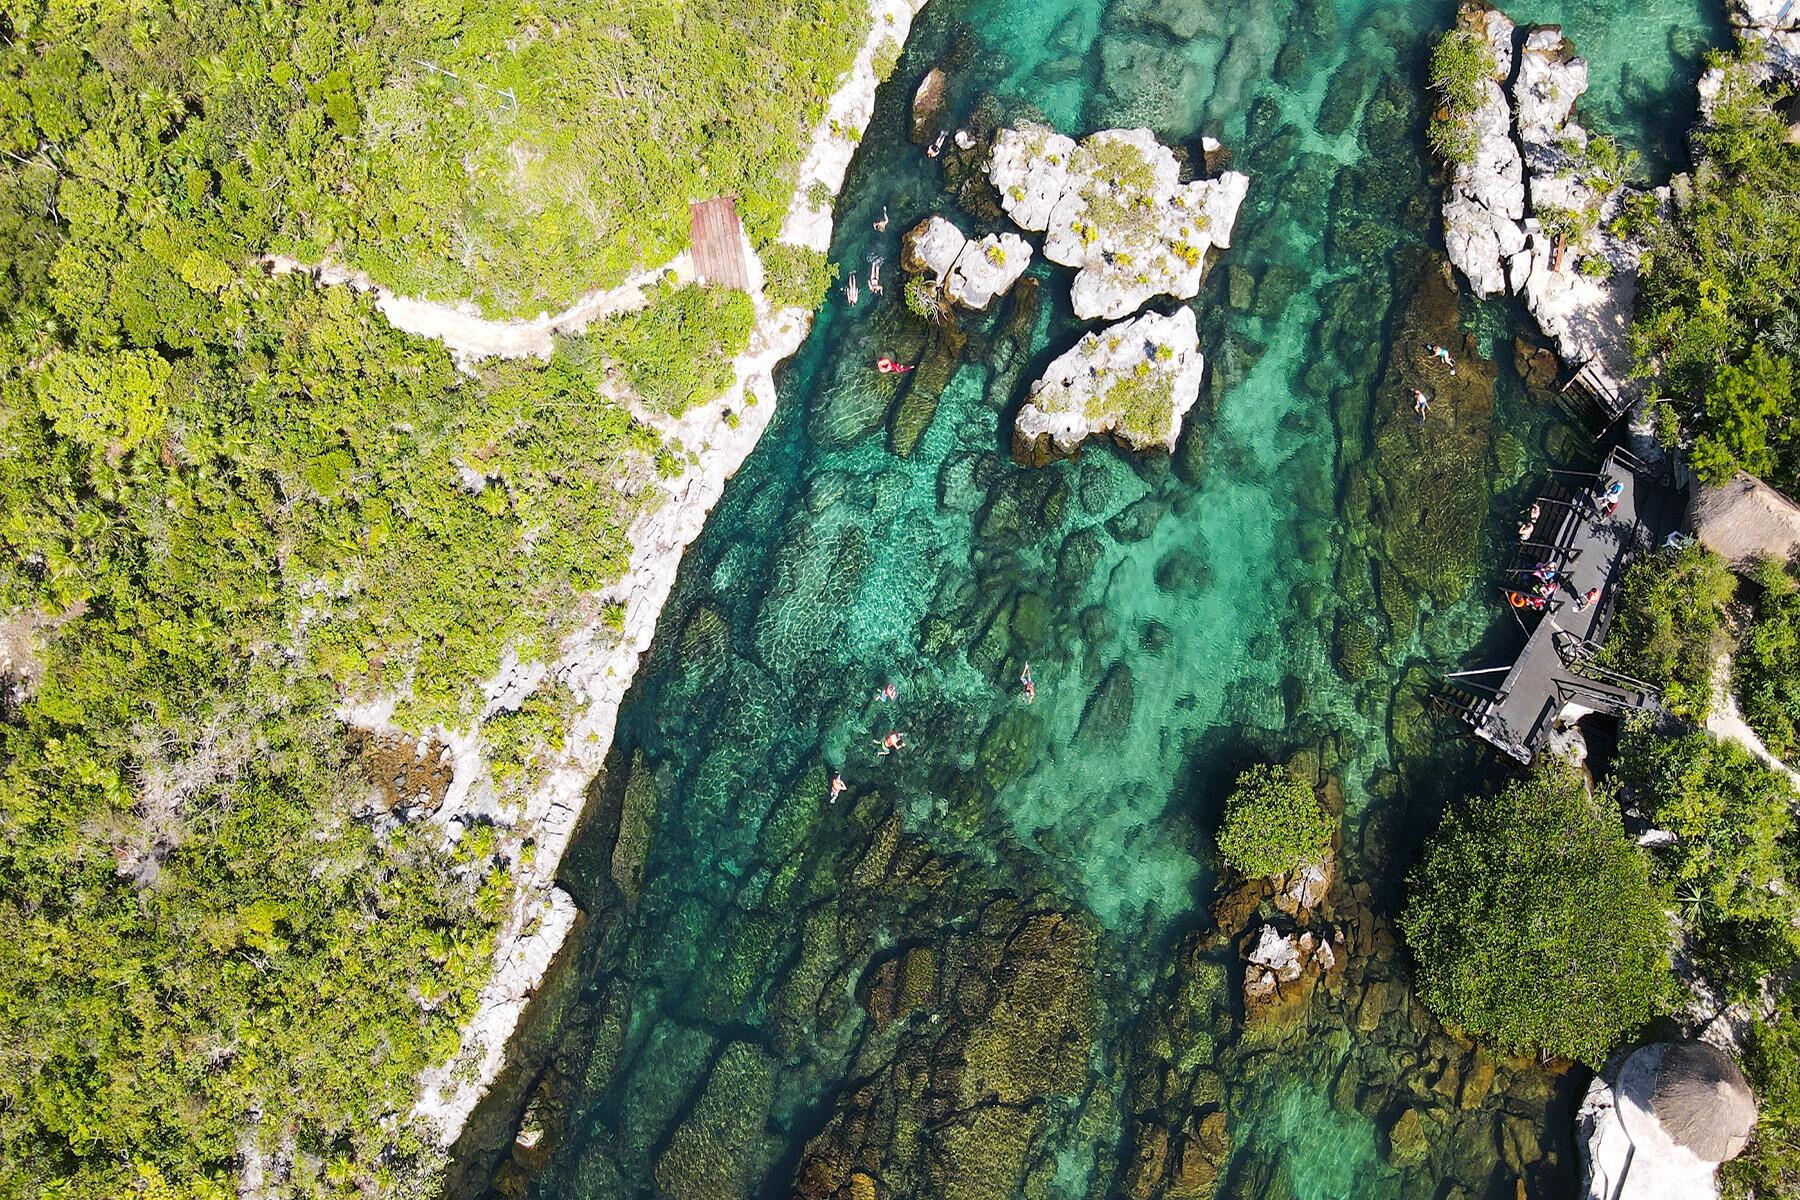 <a href='https://www.fodors.com/world/mexico-and-central-america/mexico/the-riviera-maya/experiences/news/photos/best-cenotes-to-visit-in-riviera-maya#'>From &quot;The 10 Most Magical Cenotes in the Riviera Maya: Cenote Yal-Kú&quot;</a>